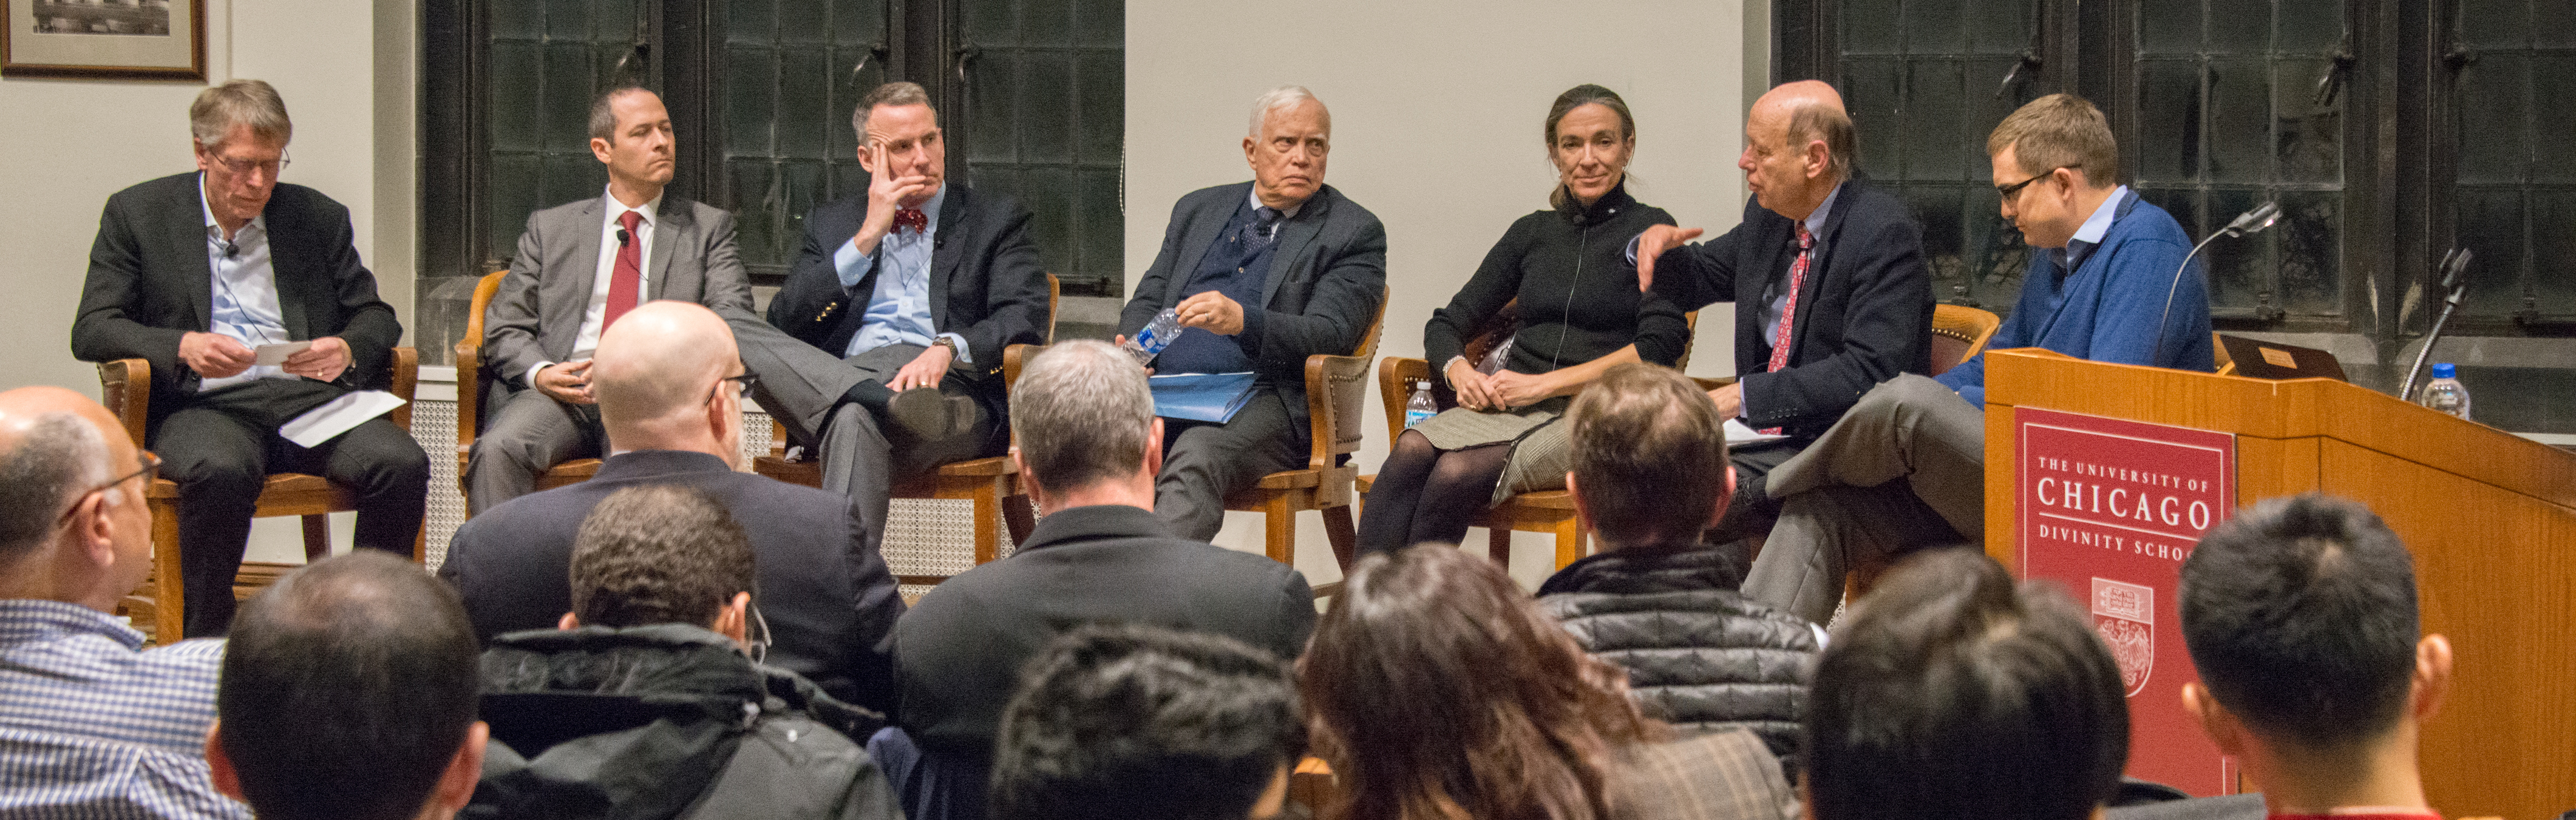 20191108 BFI University of Chicago Policy Forum on the Pension Crisis. Held on November 08, 2019 at Swift Hall. (Photo by Joe Sterbenc)